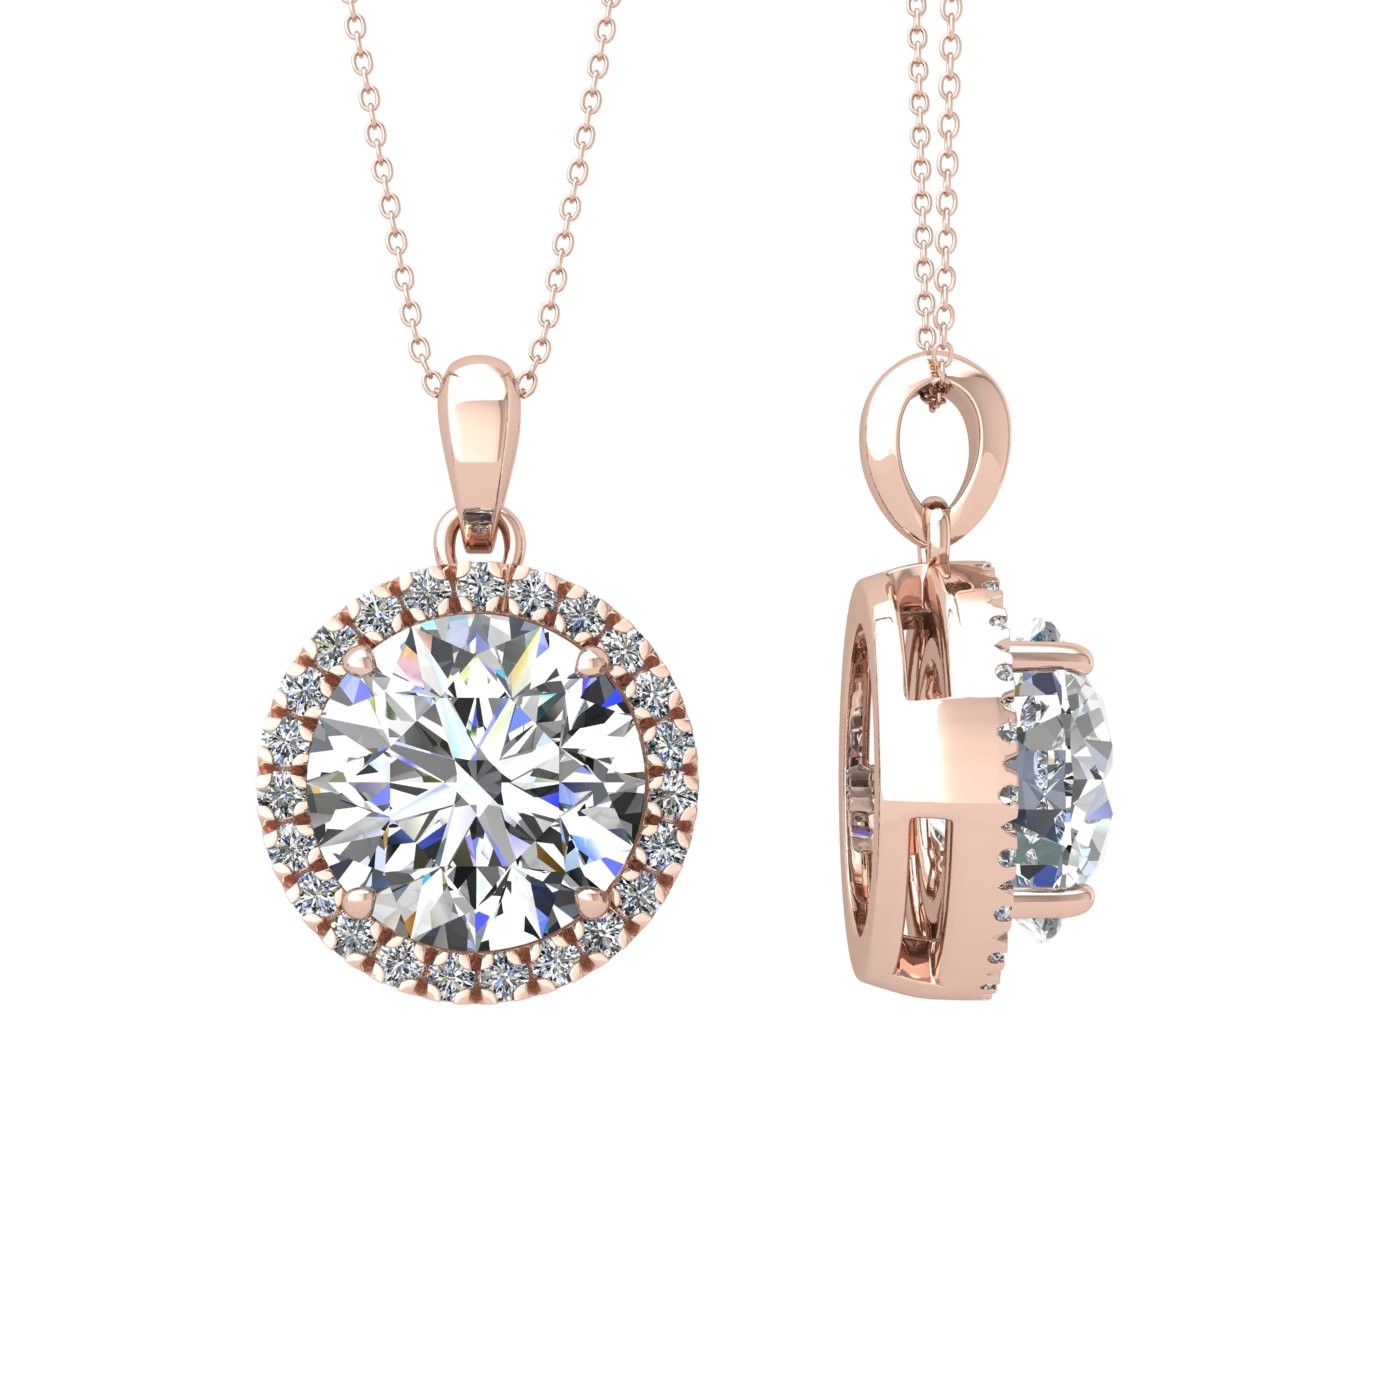 18k rose gold  0,5 ct 4 prong round shape diamond pendant with diamond pavÉ set halo including chain seperate from the pendant Photos & images